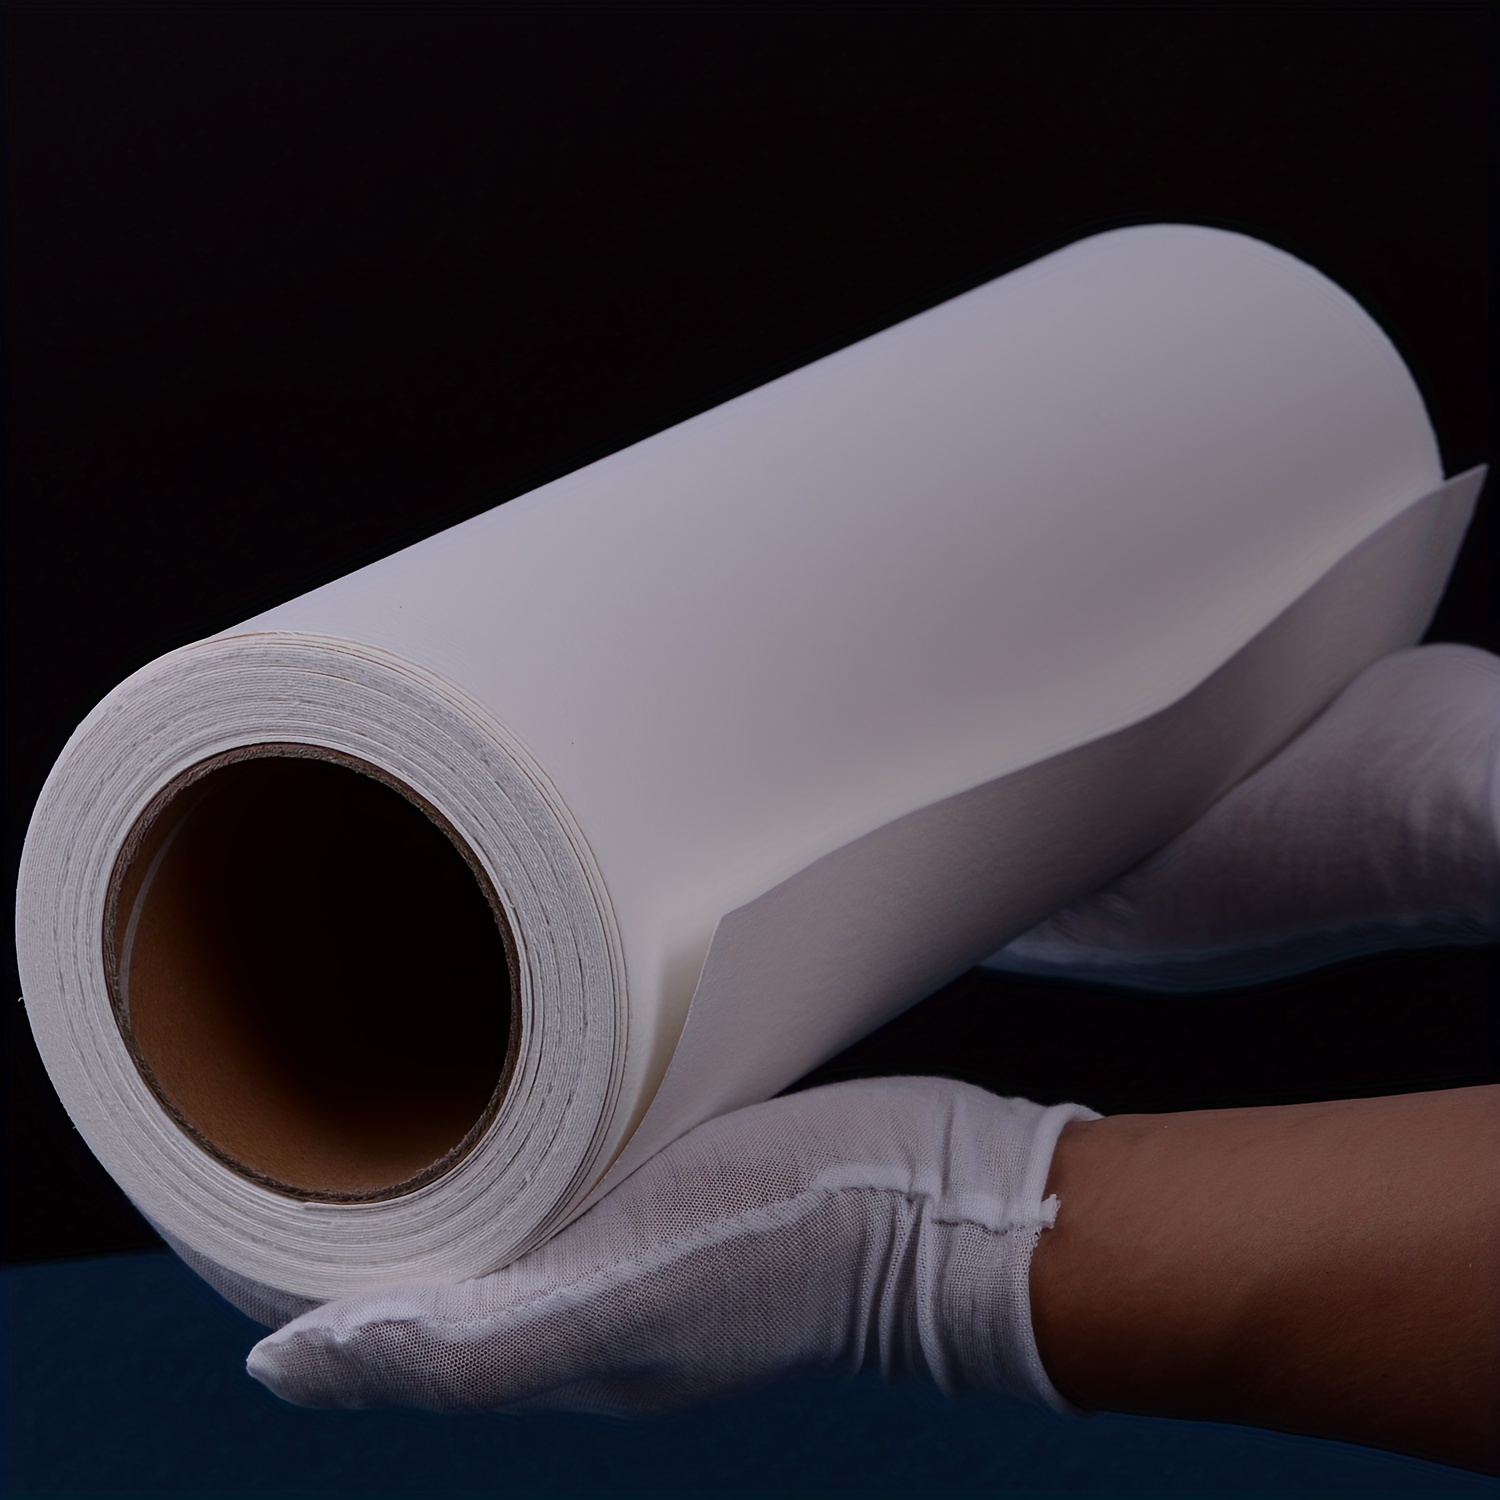 

Baohong 300g Roll Watercolor Paper 37cm Cotton 100% College Grade 10 Meters Long Width 37cm, Can Cut Any Size Size Thin Lines Medium Thick Thick Lines